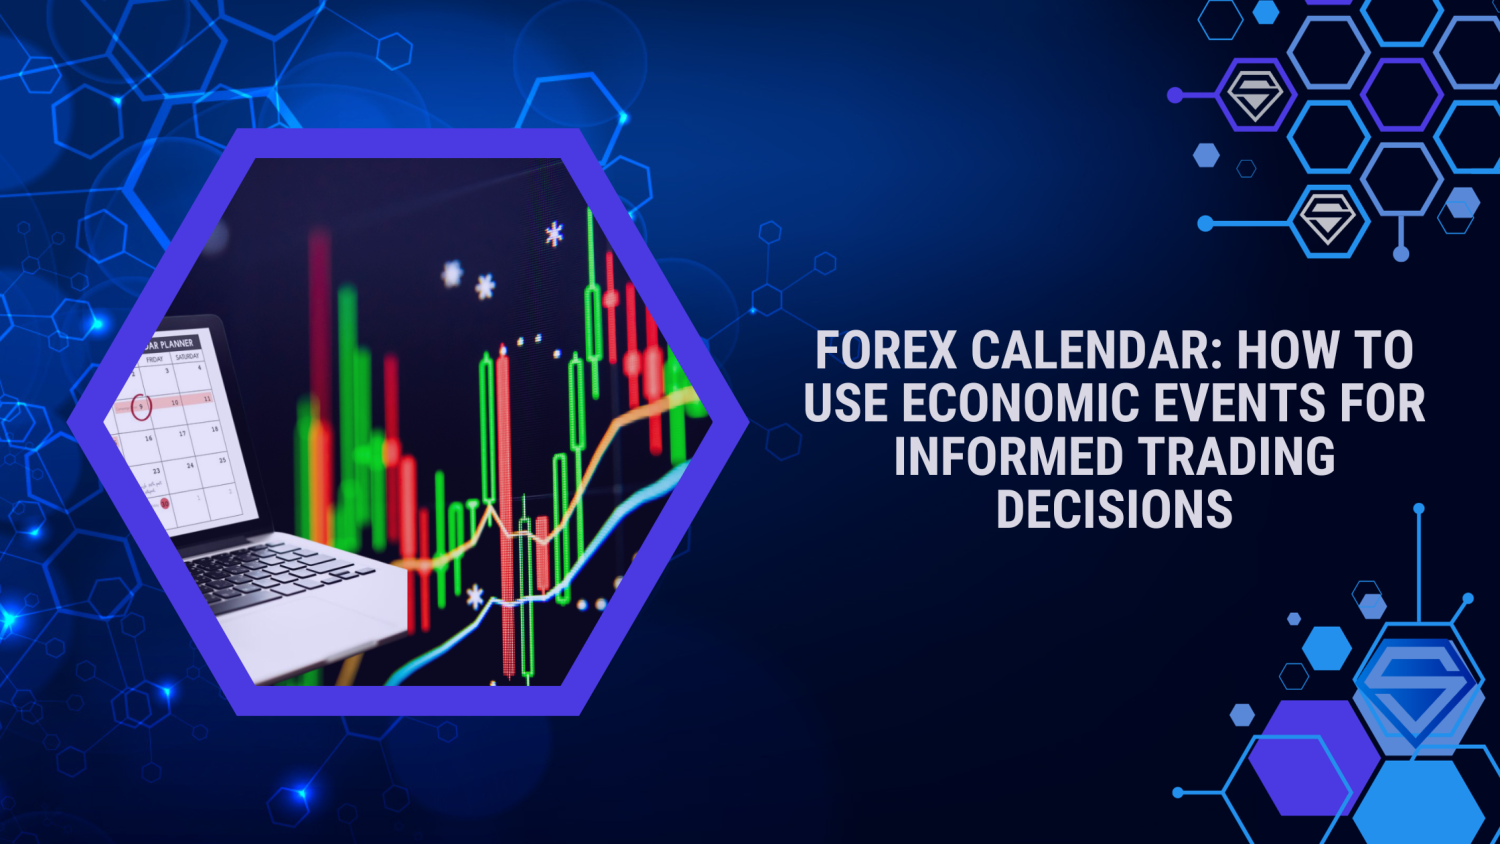 Forex Calendar: How to use Economic Events for Informed Trading Decisions